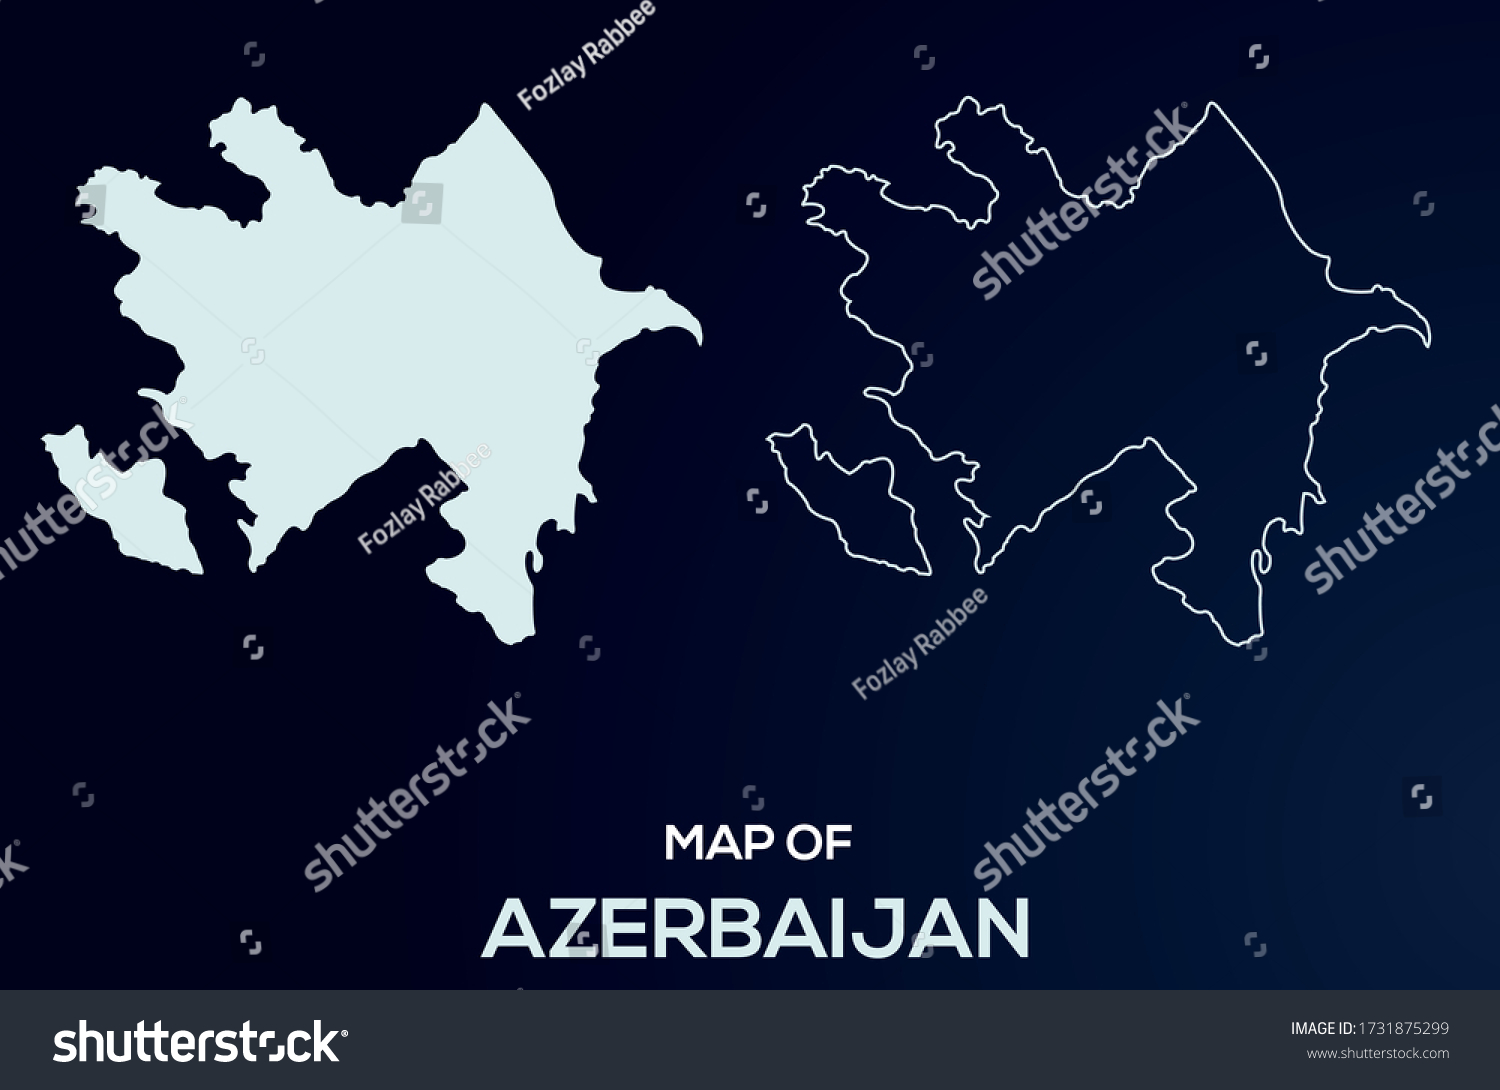 SVG of Map of Azerbaijan. Abstract design, vector illustration by using adobe illustrator. Azerbaijan isolated map. Azerbaijan Outline map. Editable Map design for anywhere uses. svg